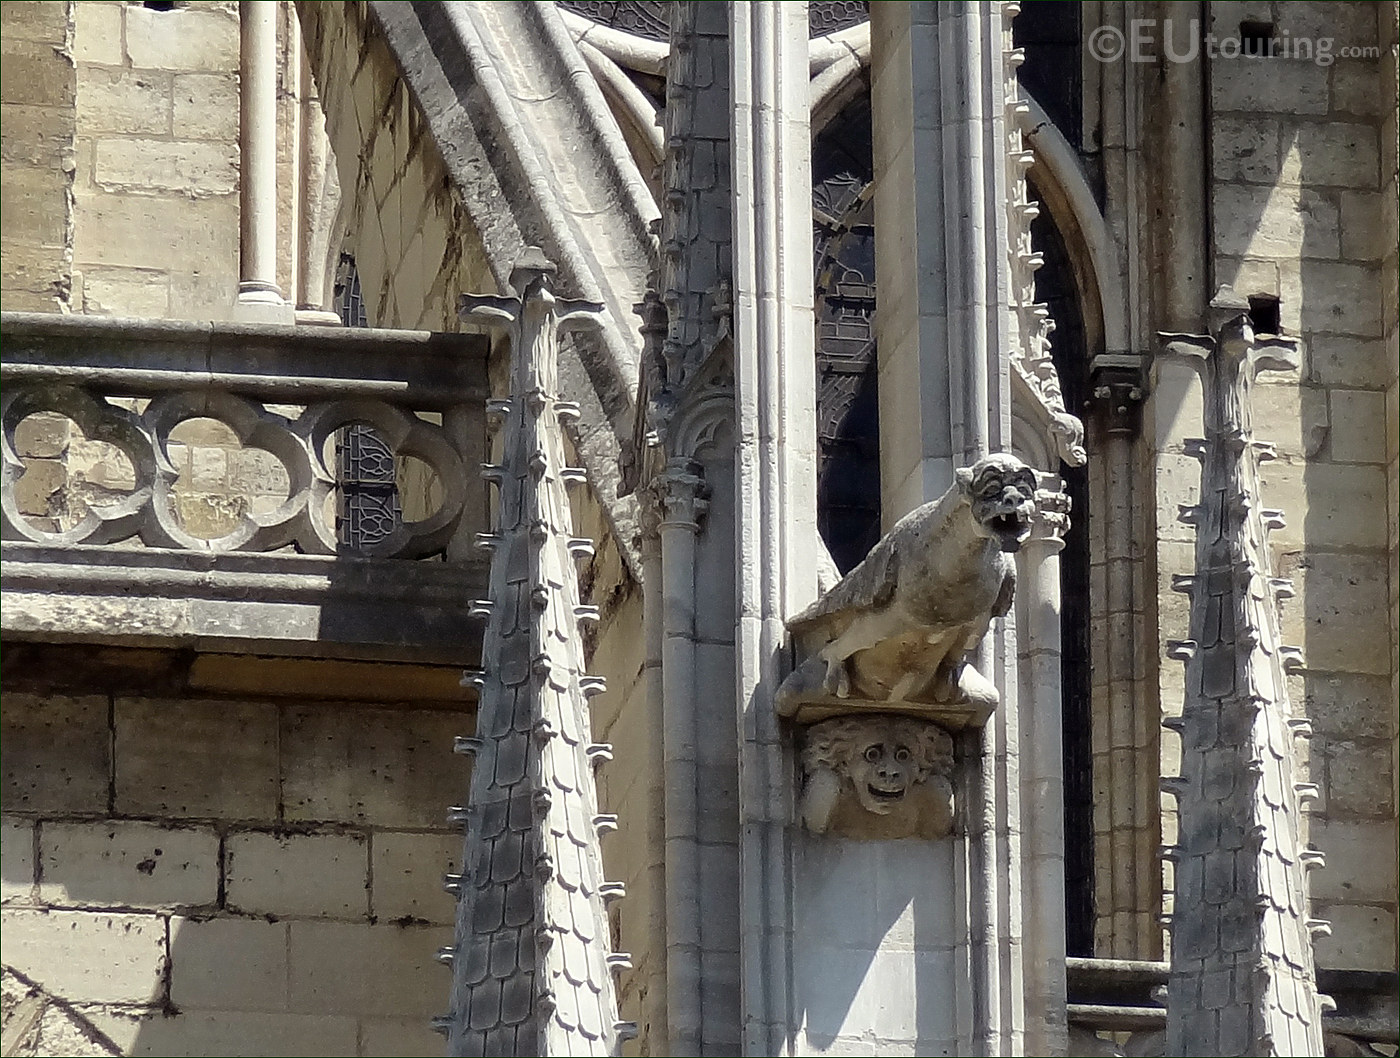 High Definition Photos Of Notre Dame Cathedral In Paris - Page 1